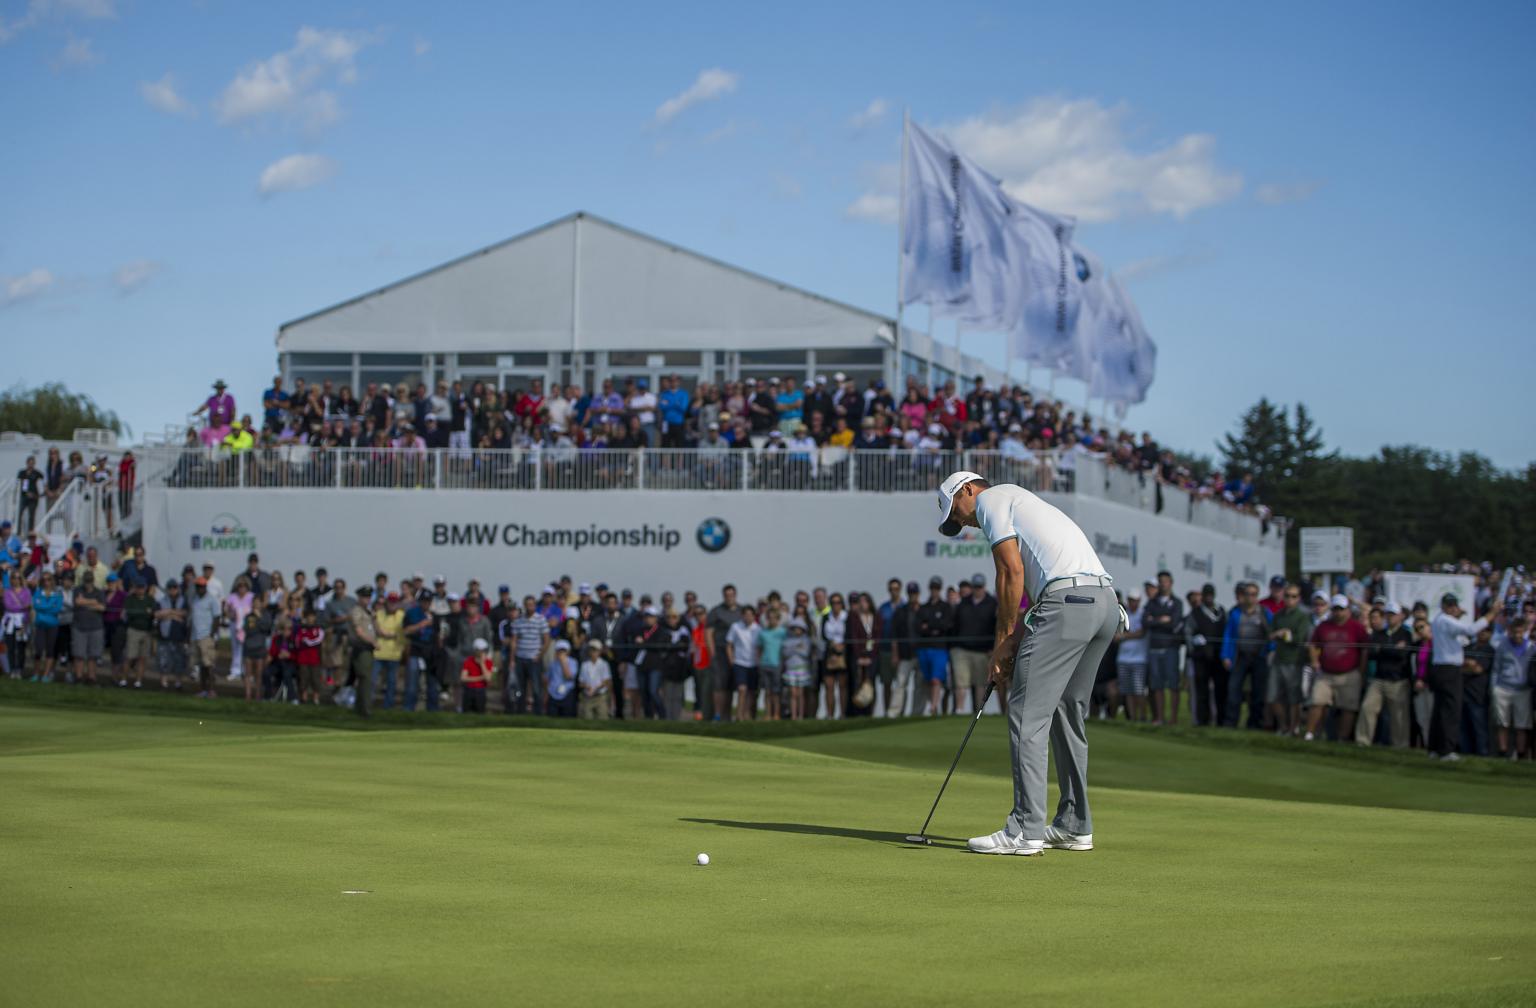 BMW Championship 2019: Round 1 groups and UK tee times | GolfMagic